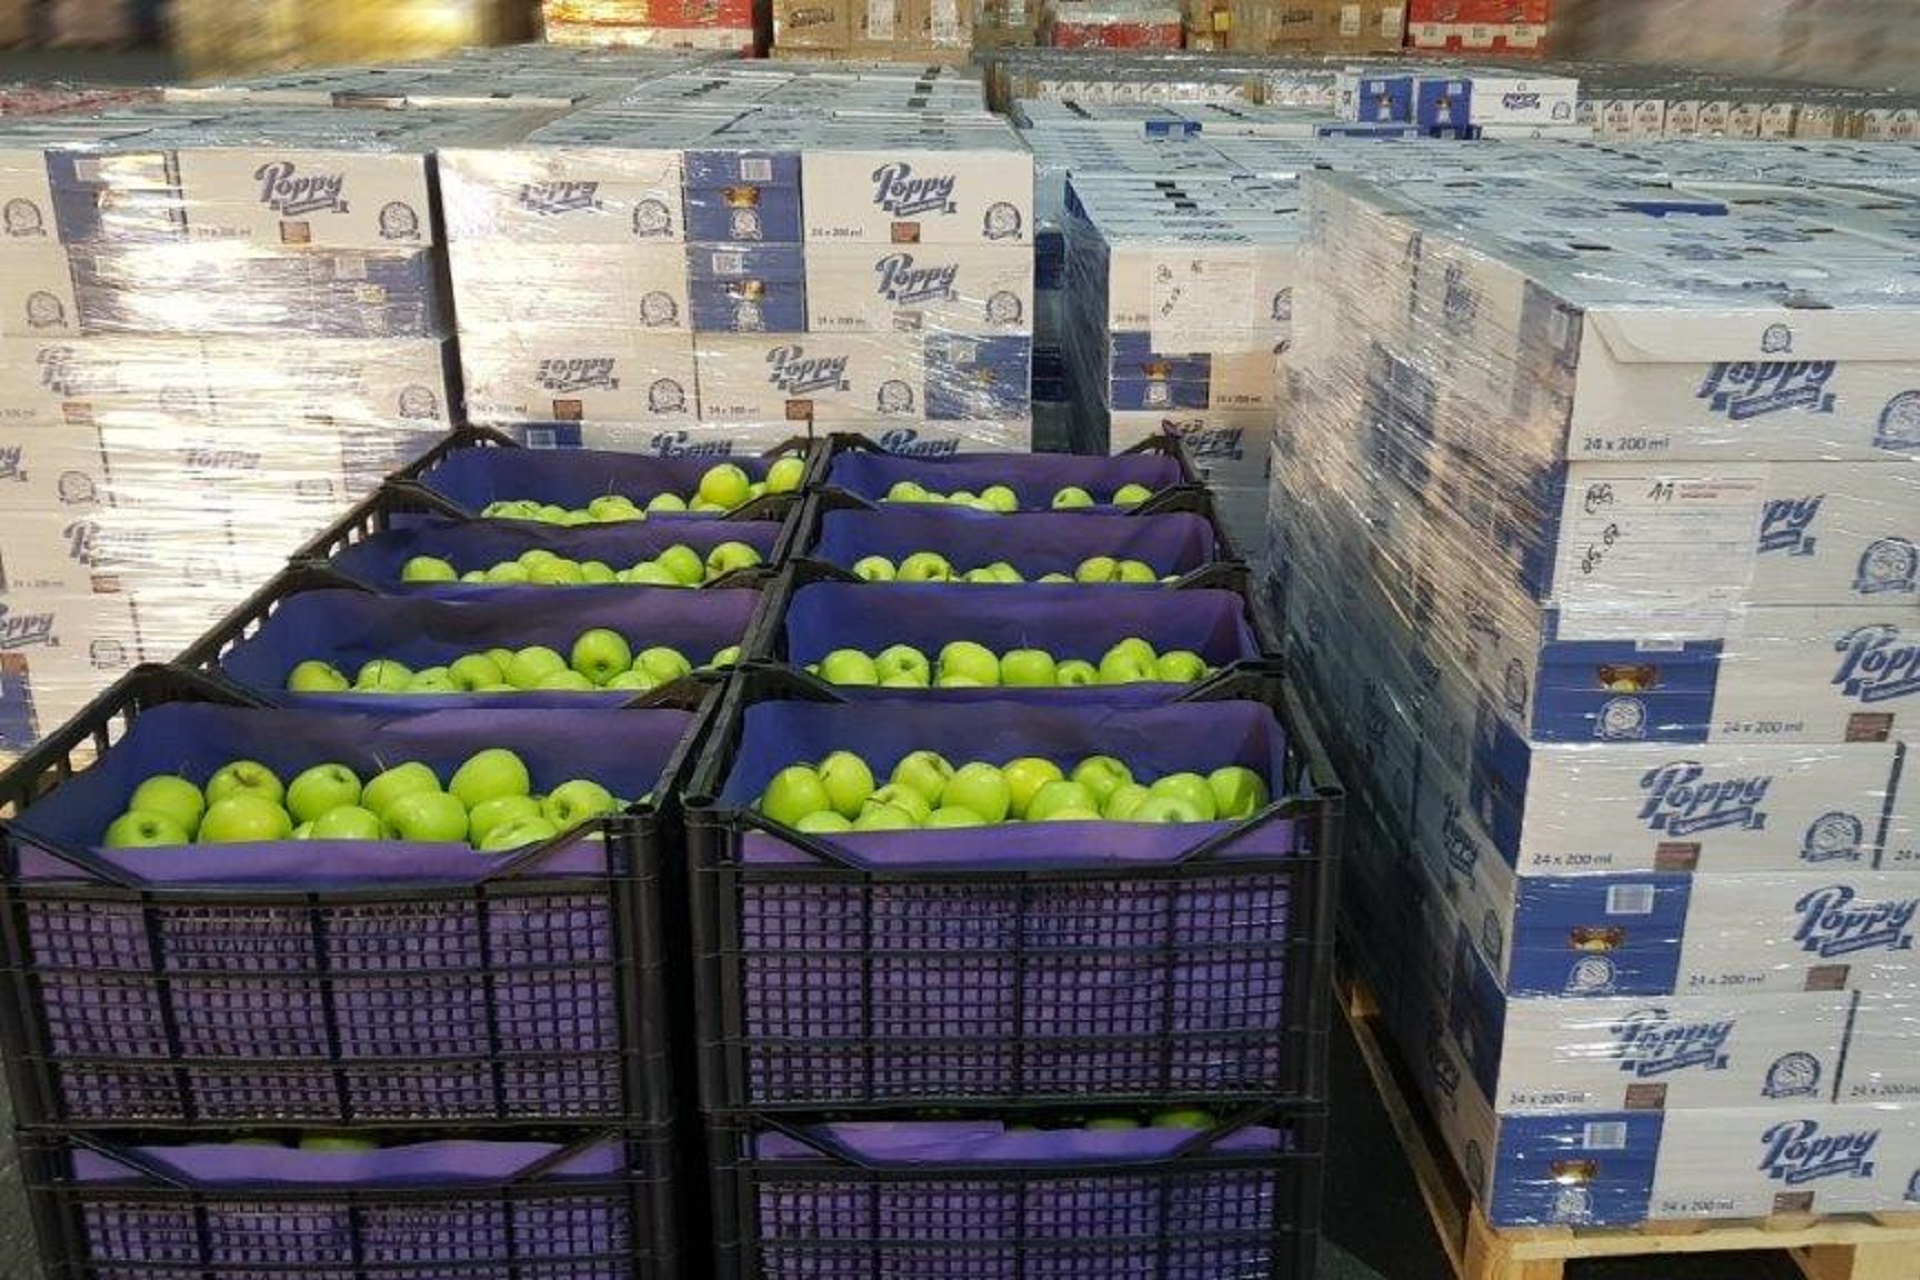 Businesses donated 45 tons of food to 10,000 households in cooperation with NALED